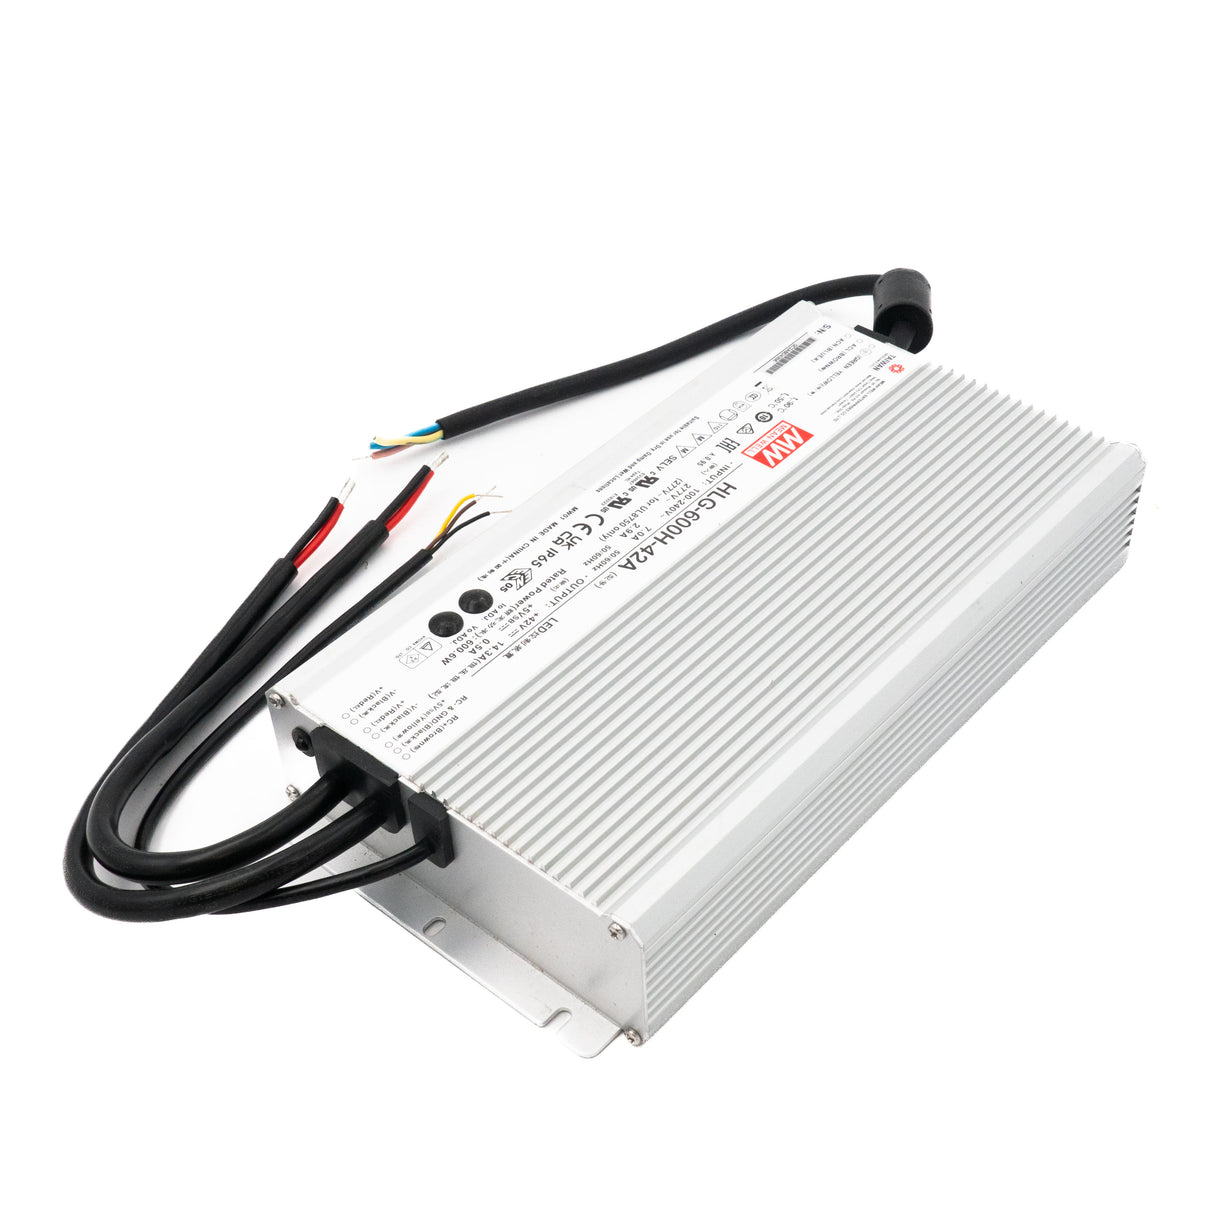 Mean Well HLG-600H-42A Power Supply 600W 42V - Adjustable - PHOTO 2